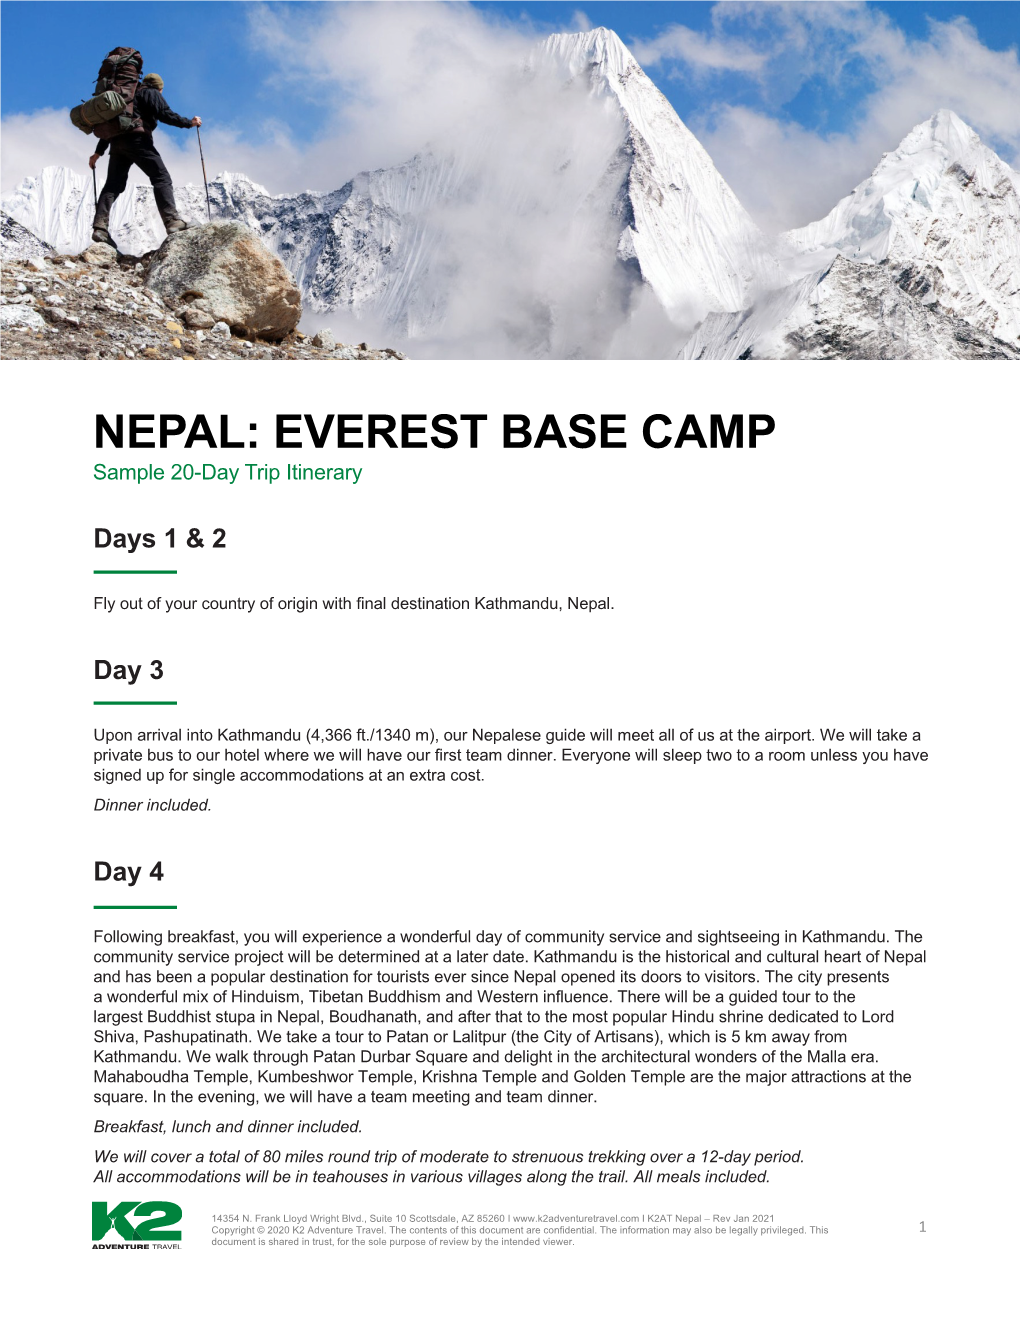 NEPAL: EVEREST BASE CAMP Sample 20-Day Trip Itinerary